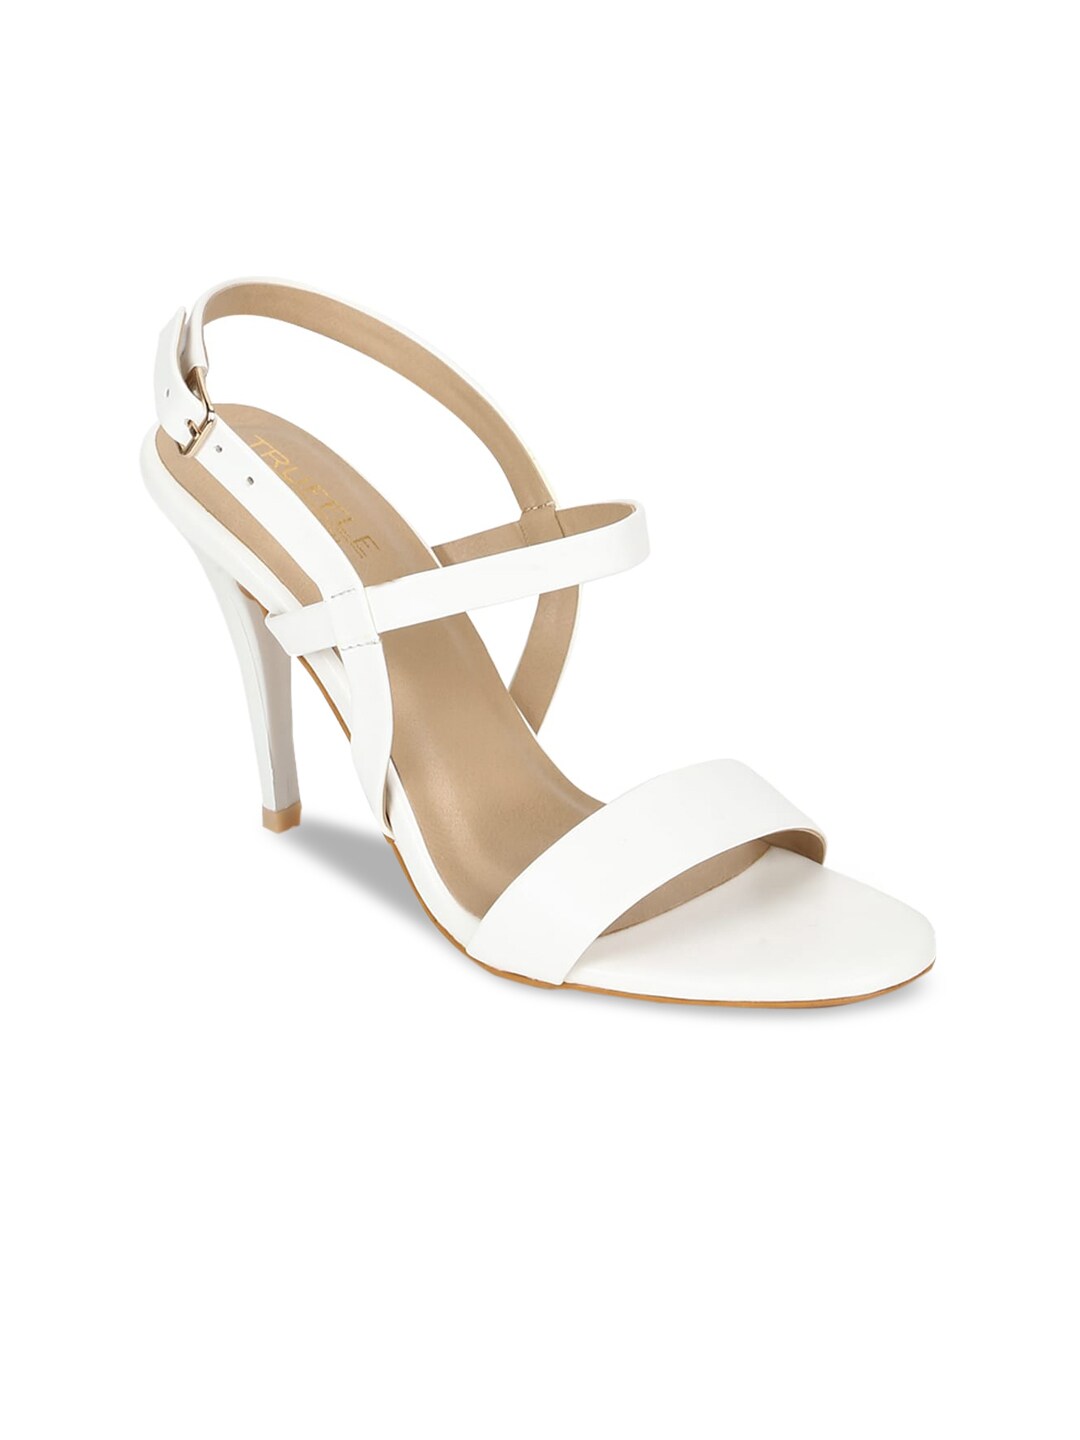 Truffle Collection Women White PU Stiletto Sandals with Buckles Price in India